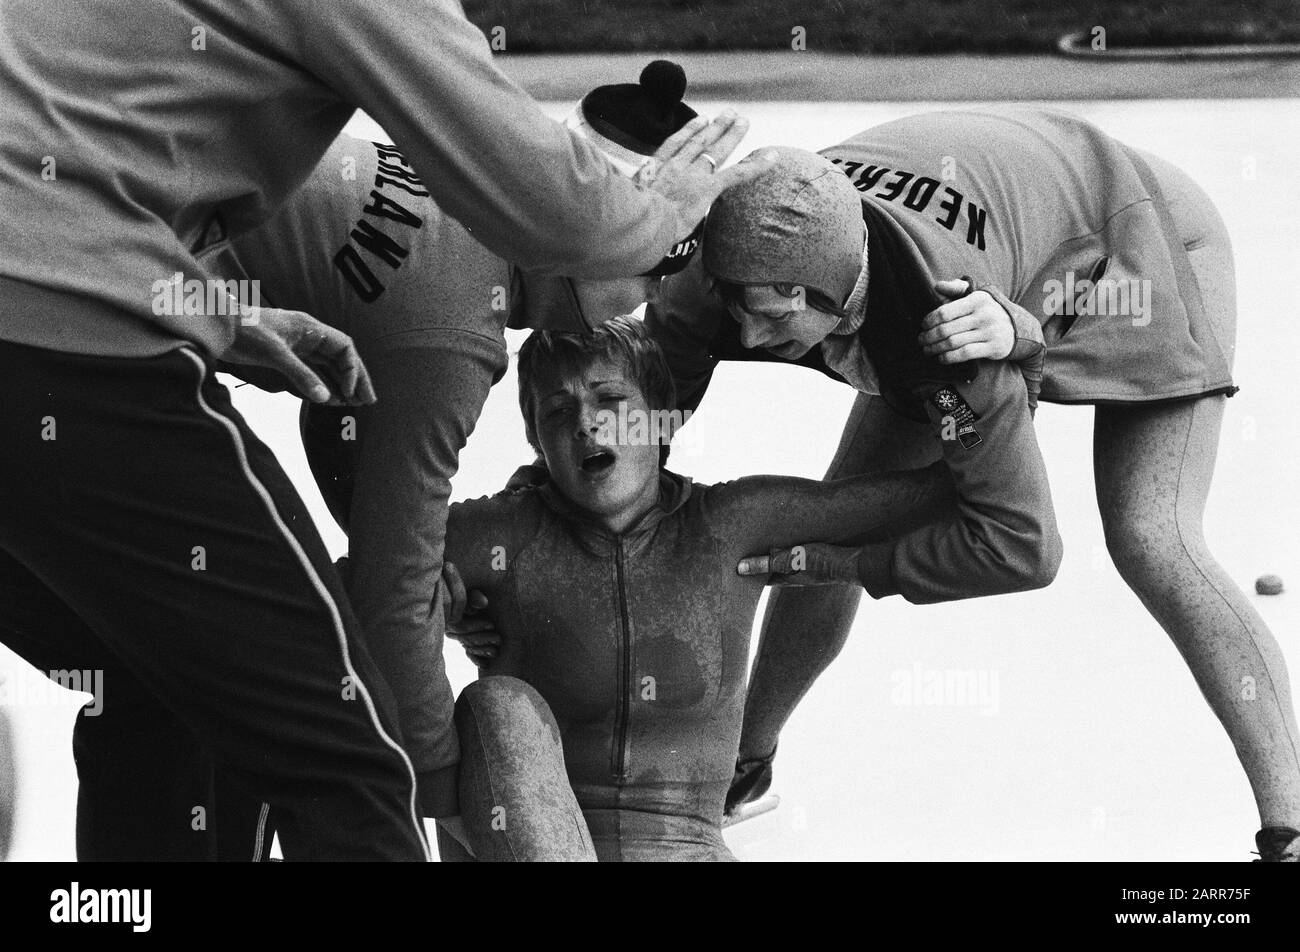 Ice skating interland Netherlands versus Norway in Groningen  Ria Visser is helped up after her fall on the 500 meters. Date: 15 December 1979 Location: Groningen (province), Groningen (city) Keywords: skating, sport, competitions Personal name: Fisherman, Ria Stock Photo